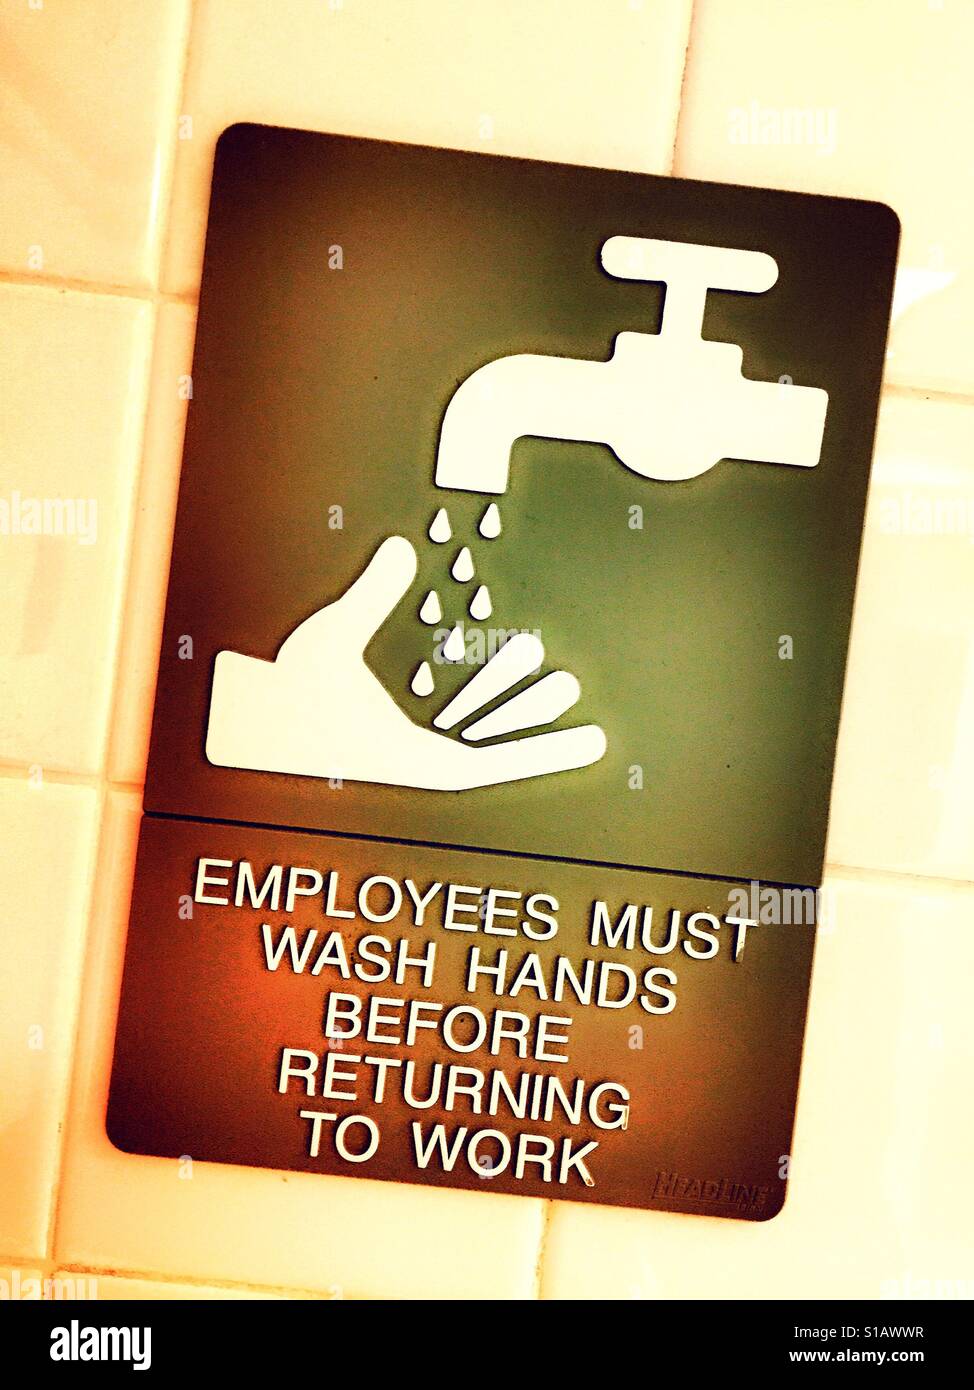 Employees must wash hands after using bathroom sign, USA Stock Photo